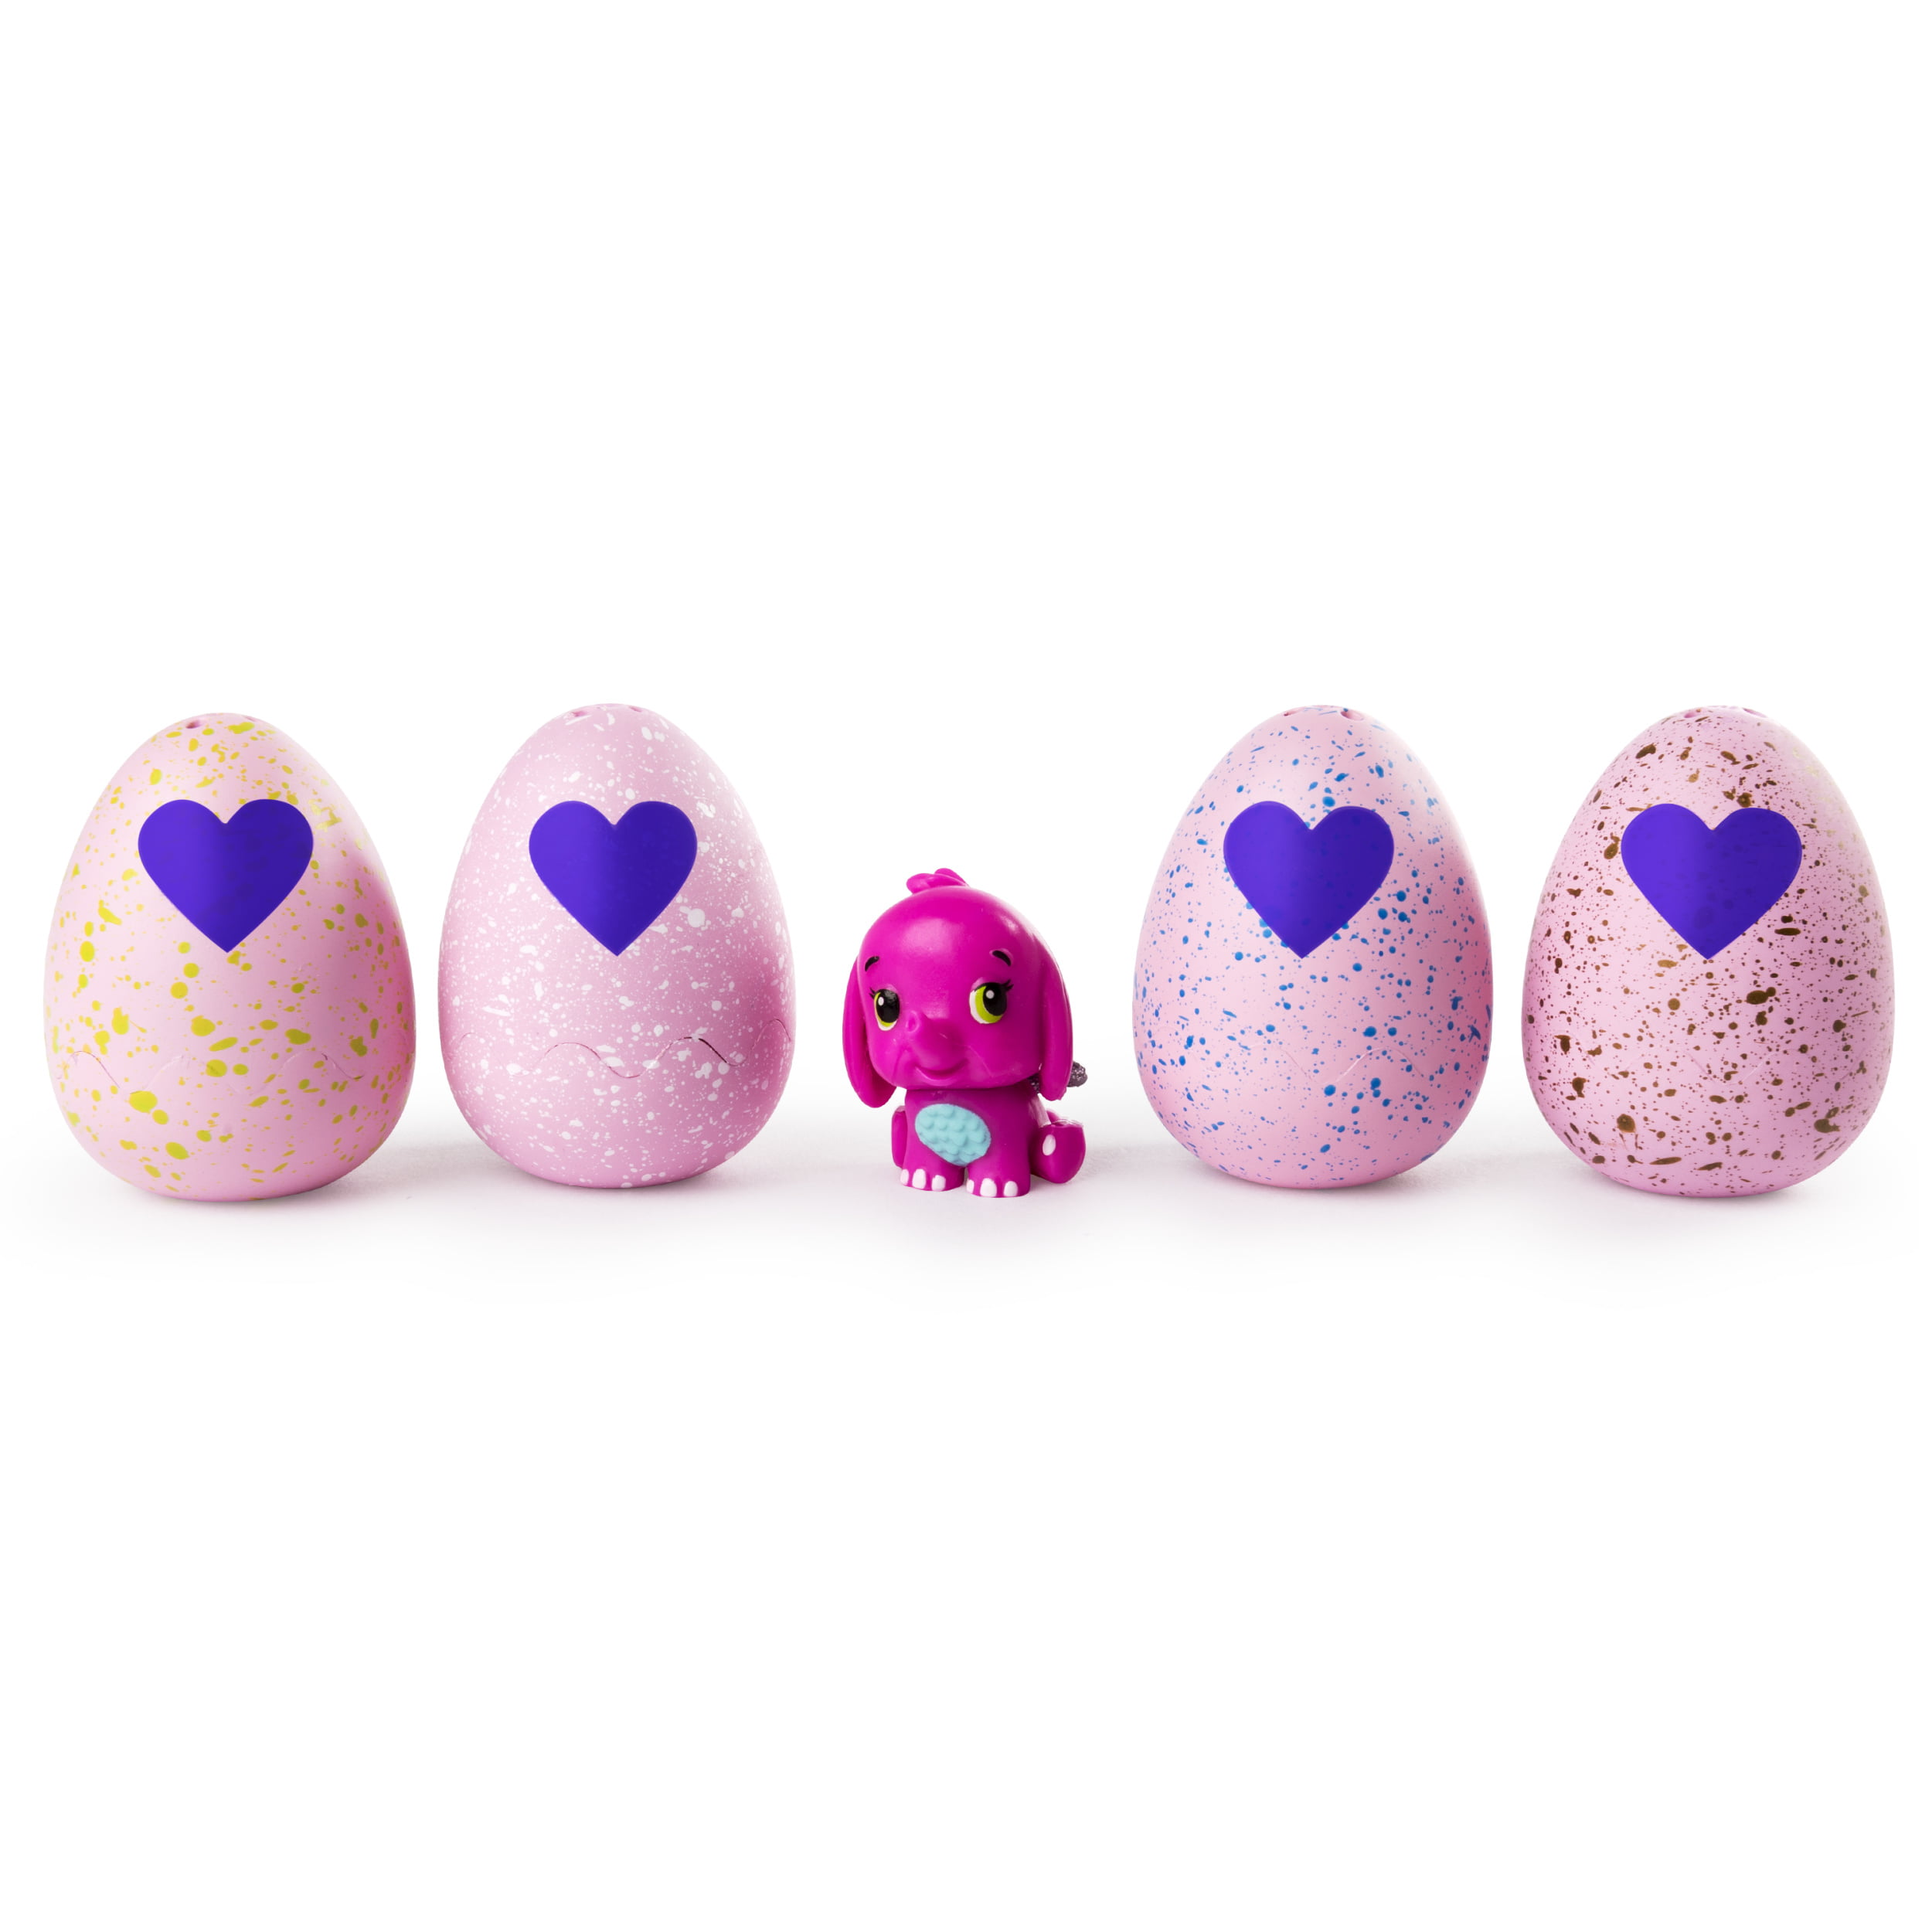 Styles & Colors May Vary Hatchimals-CollEGGtibles 4-Pack+Bonus by Spin Master 